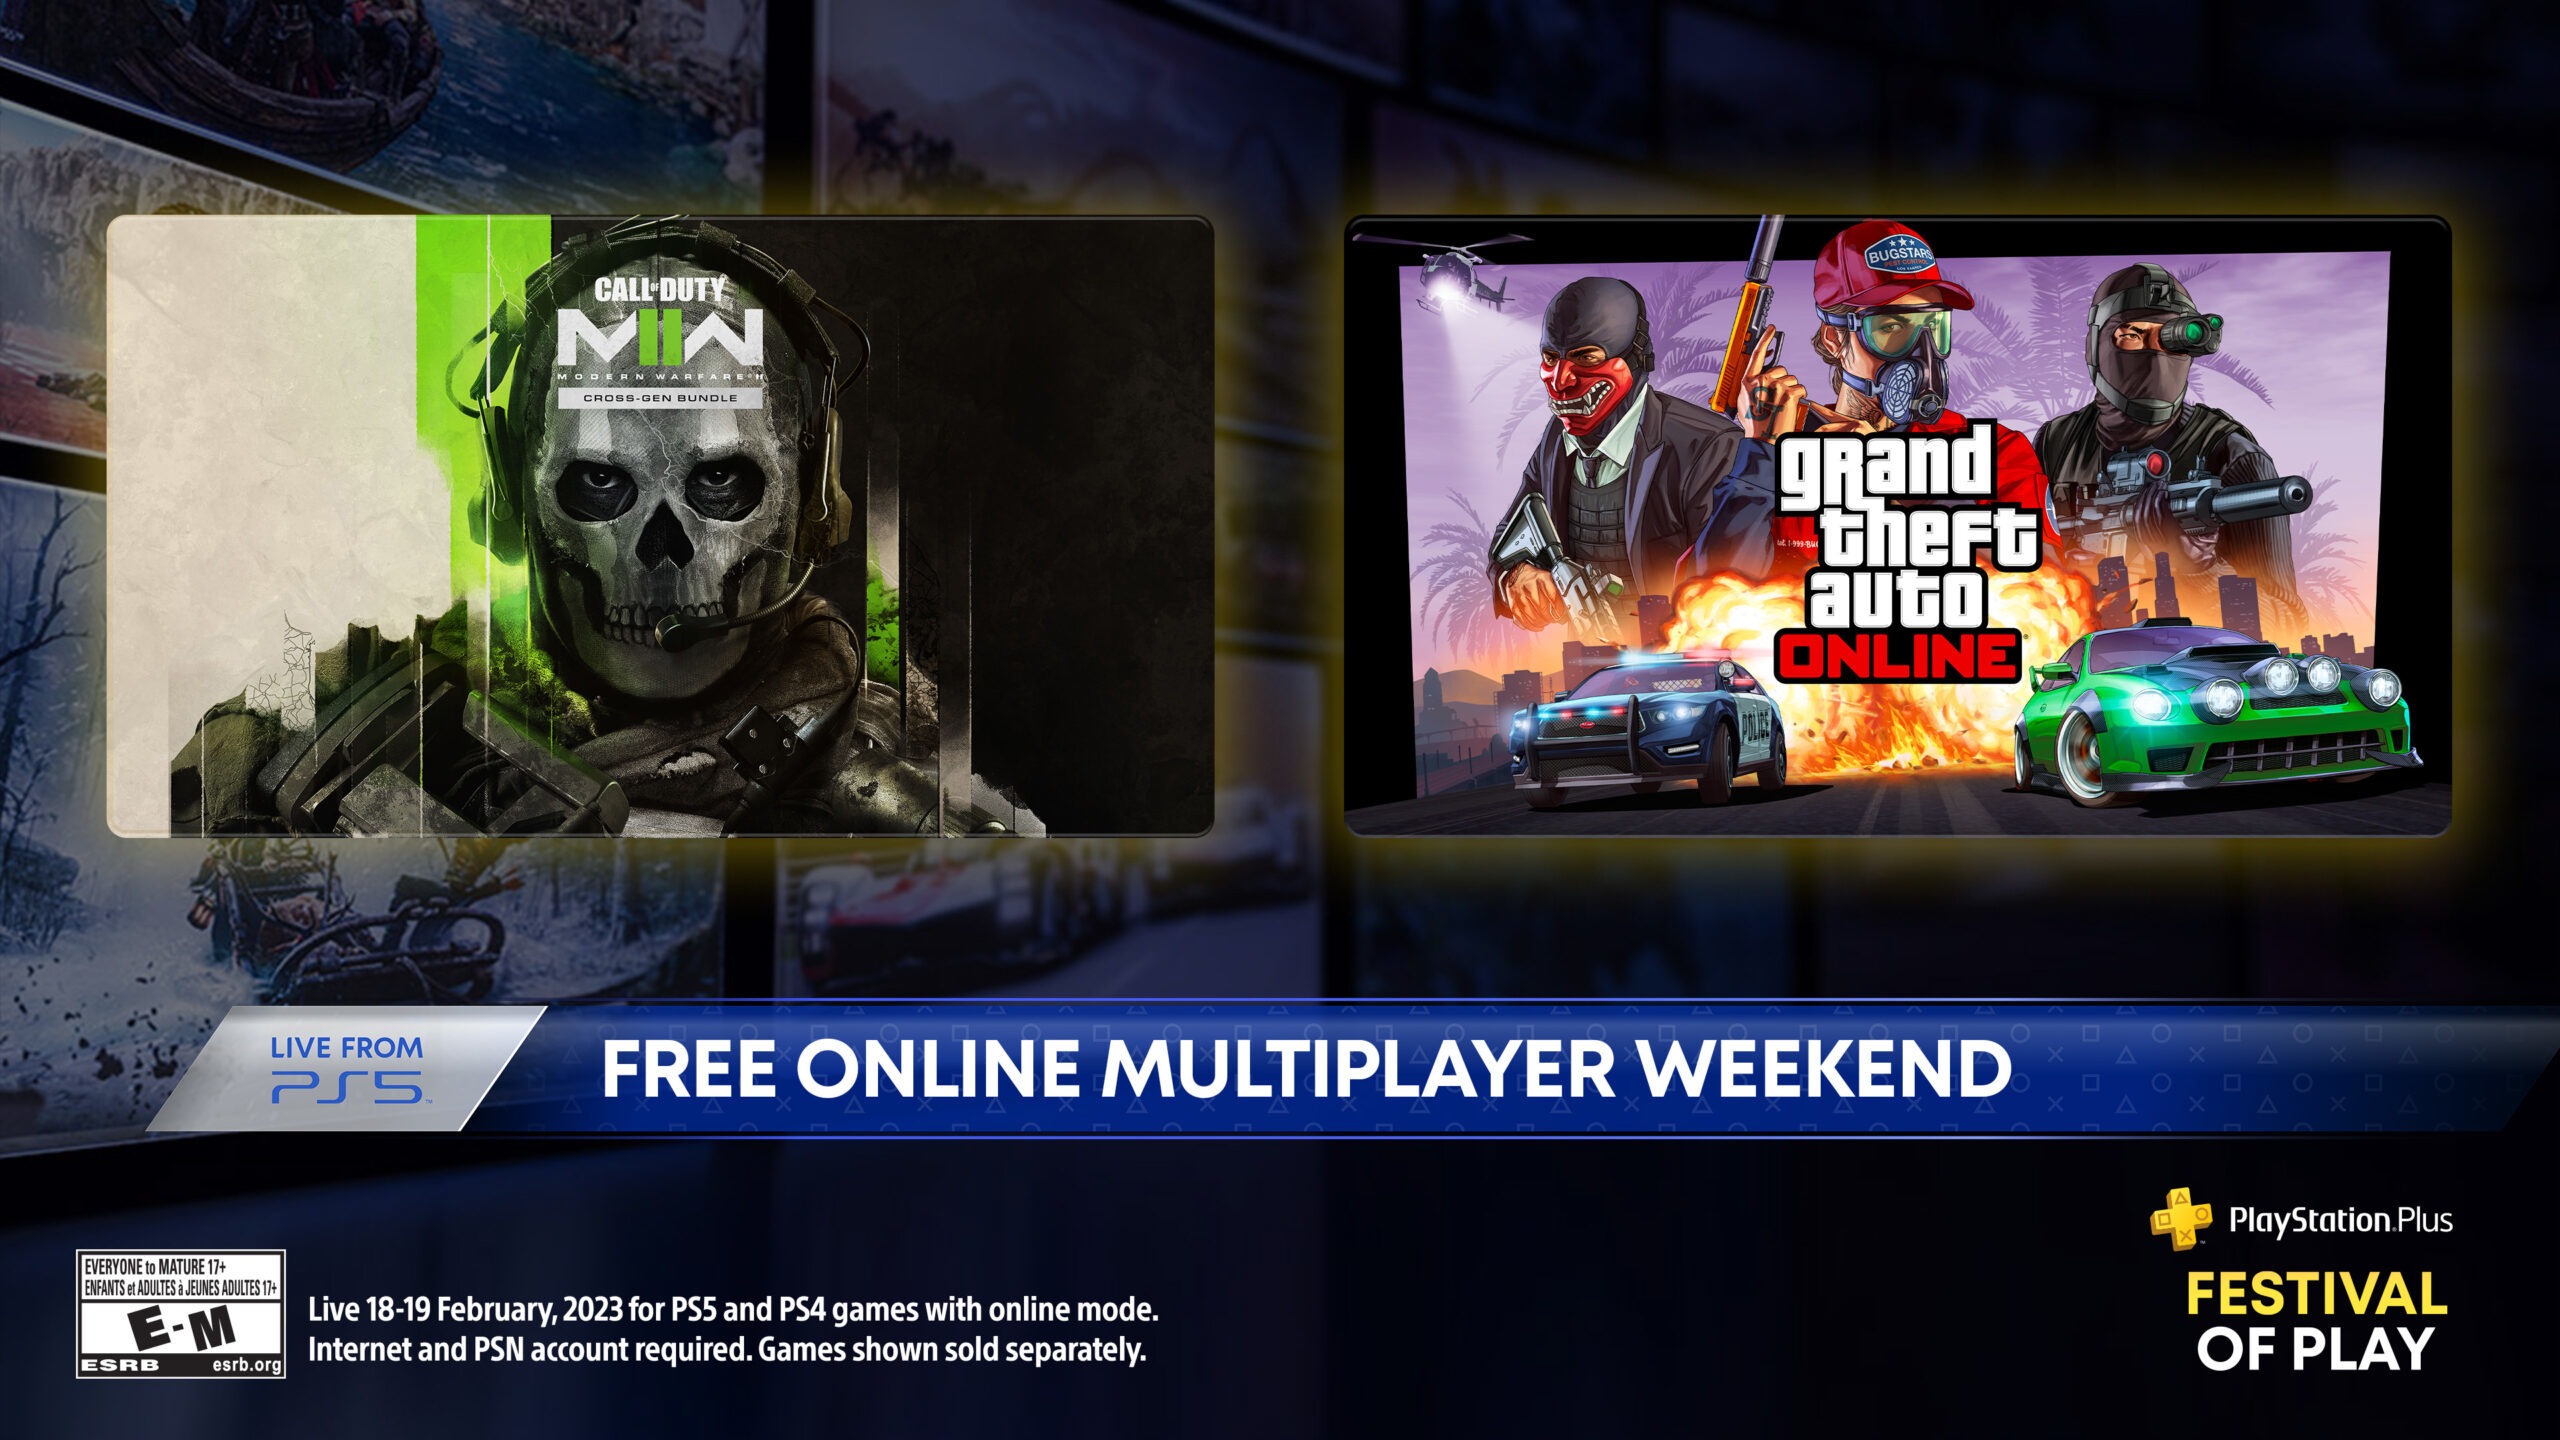 PlayStation is offering online multiplayer features for free over the weekend